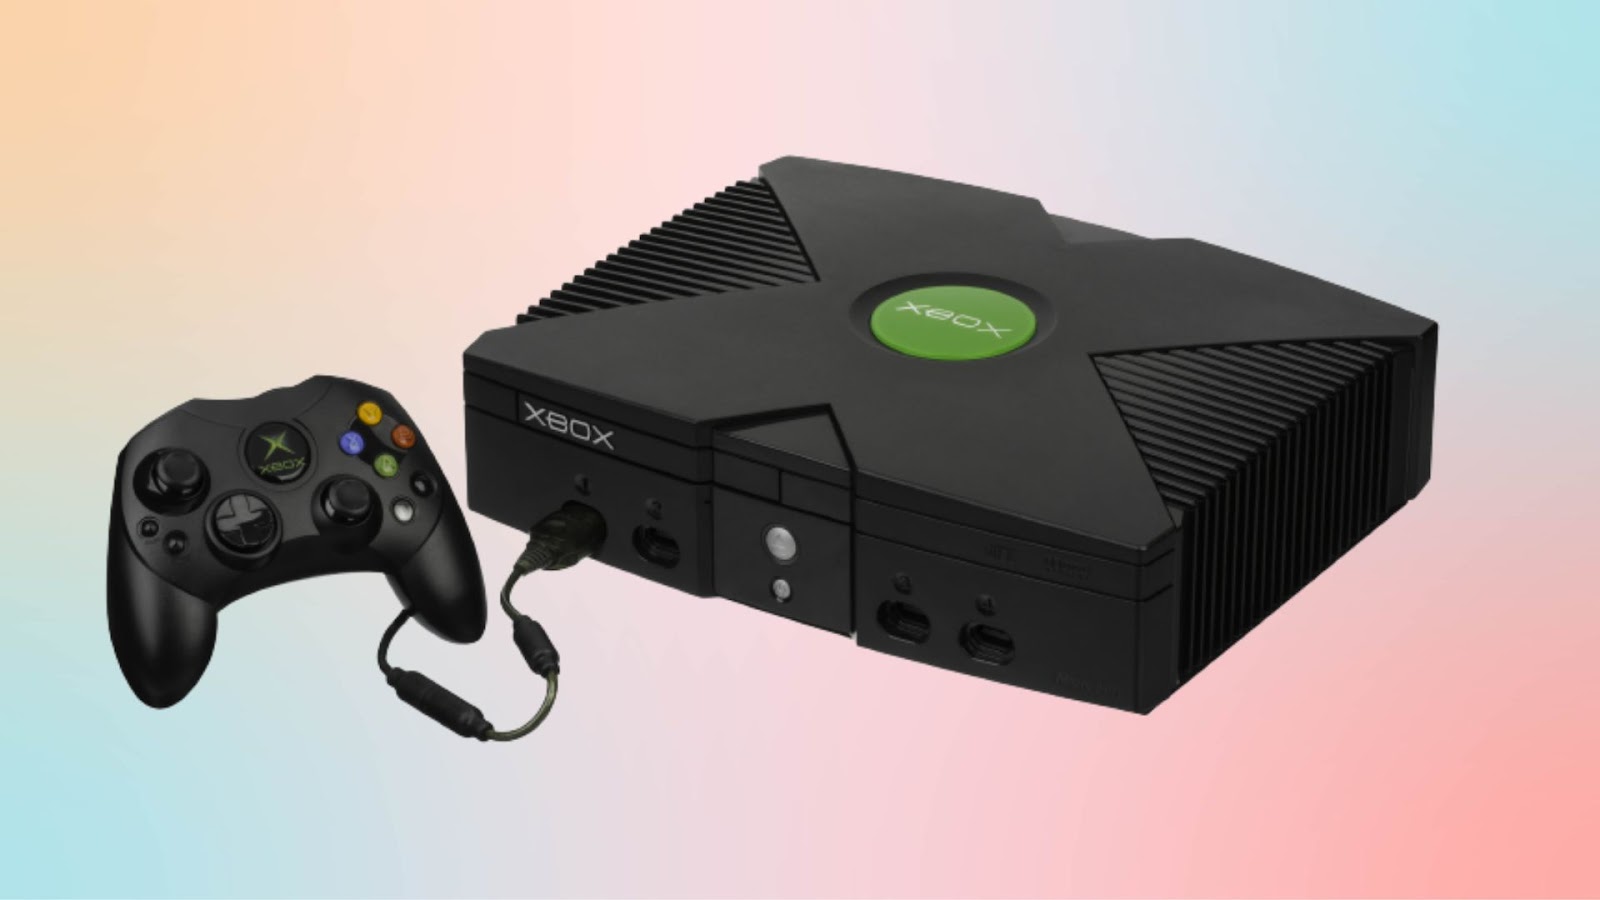 The First Generation Xbox